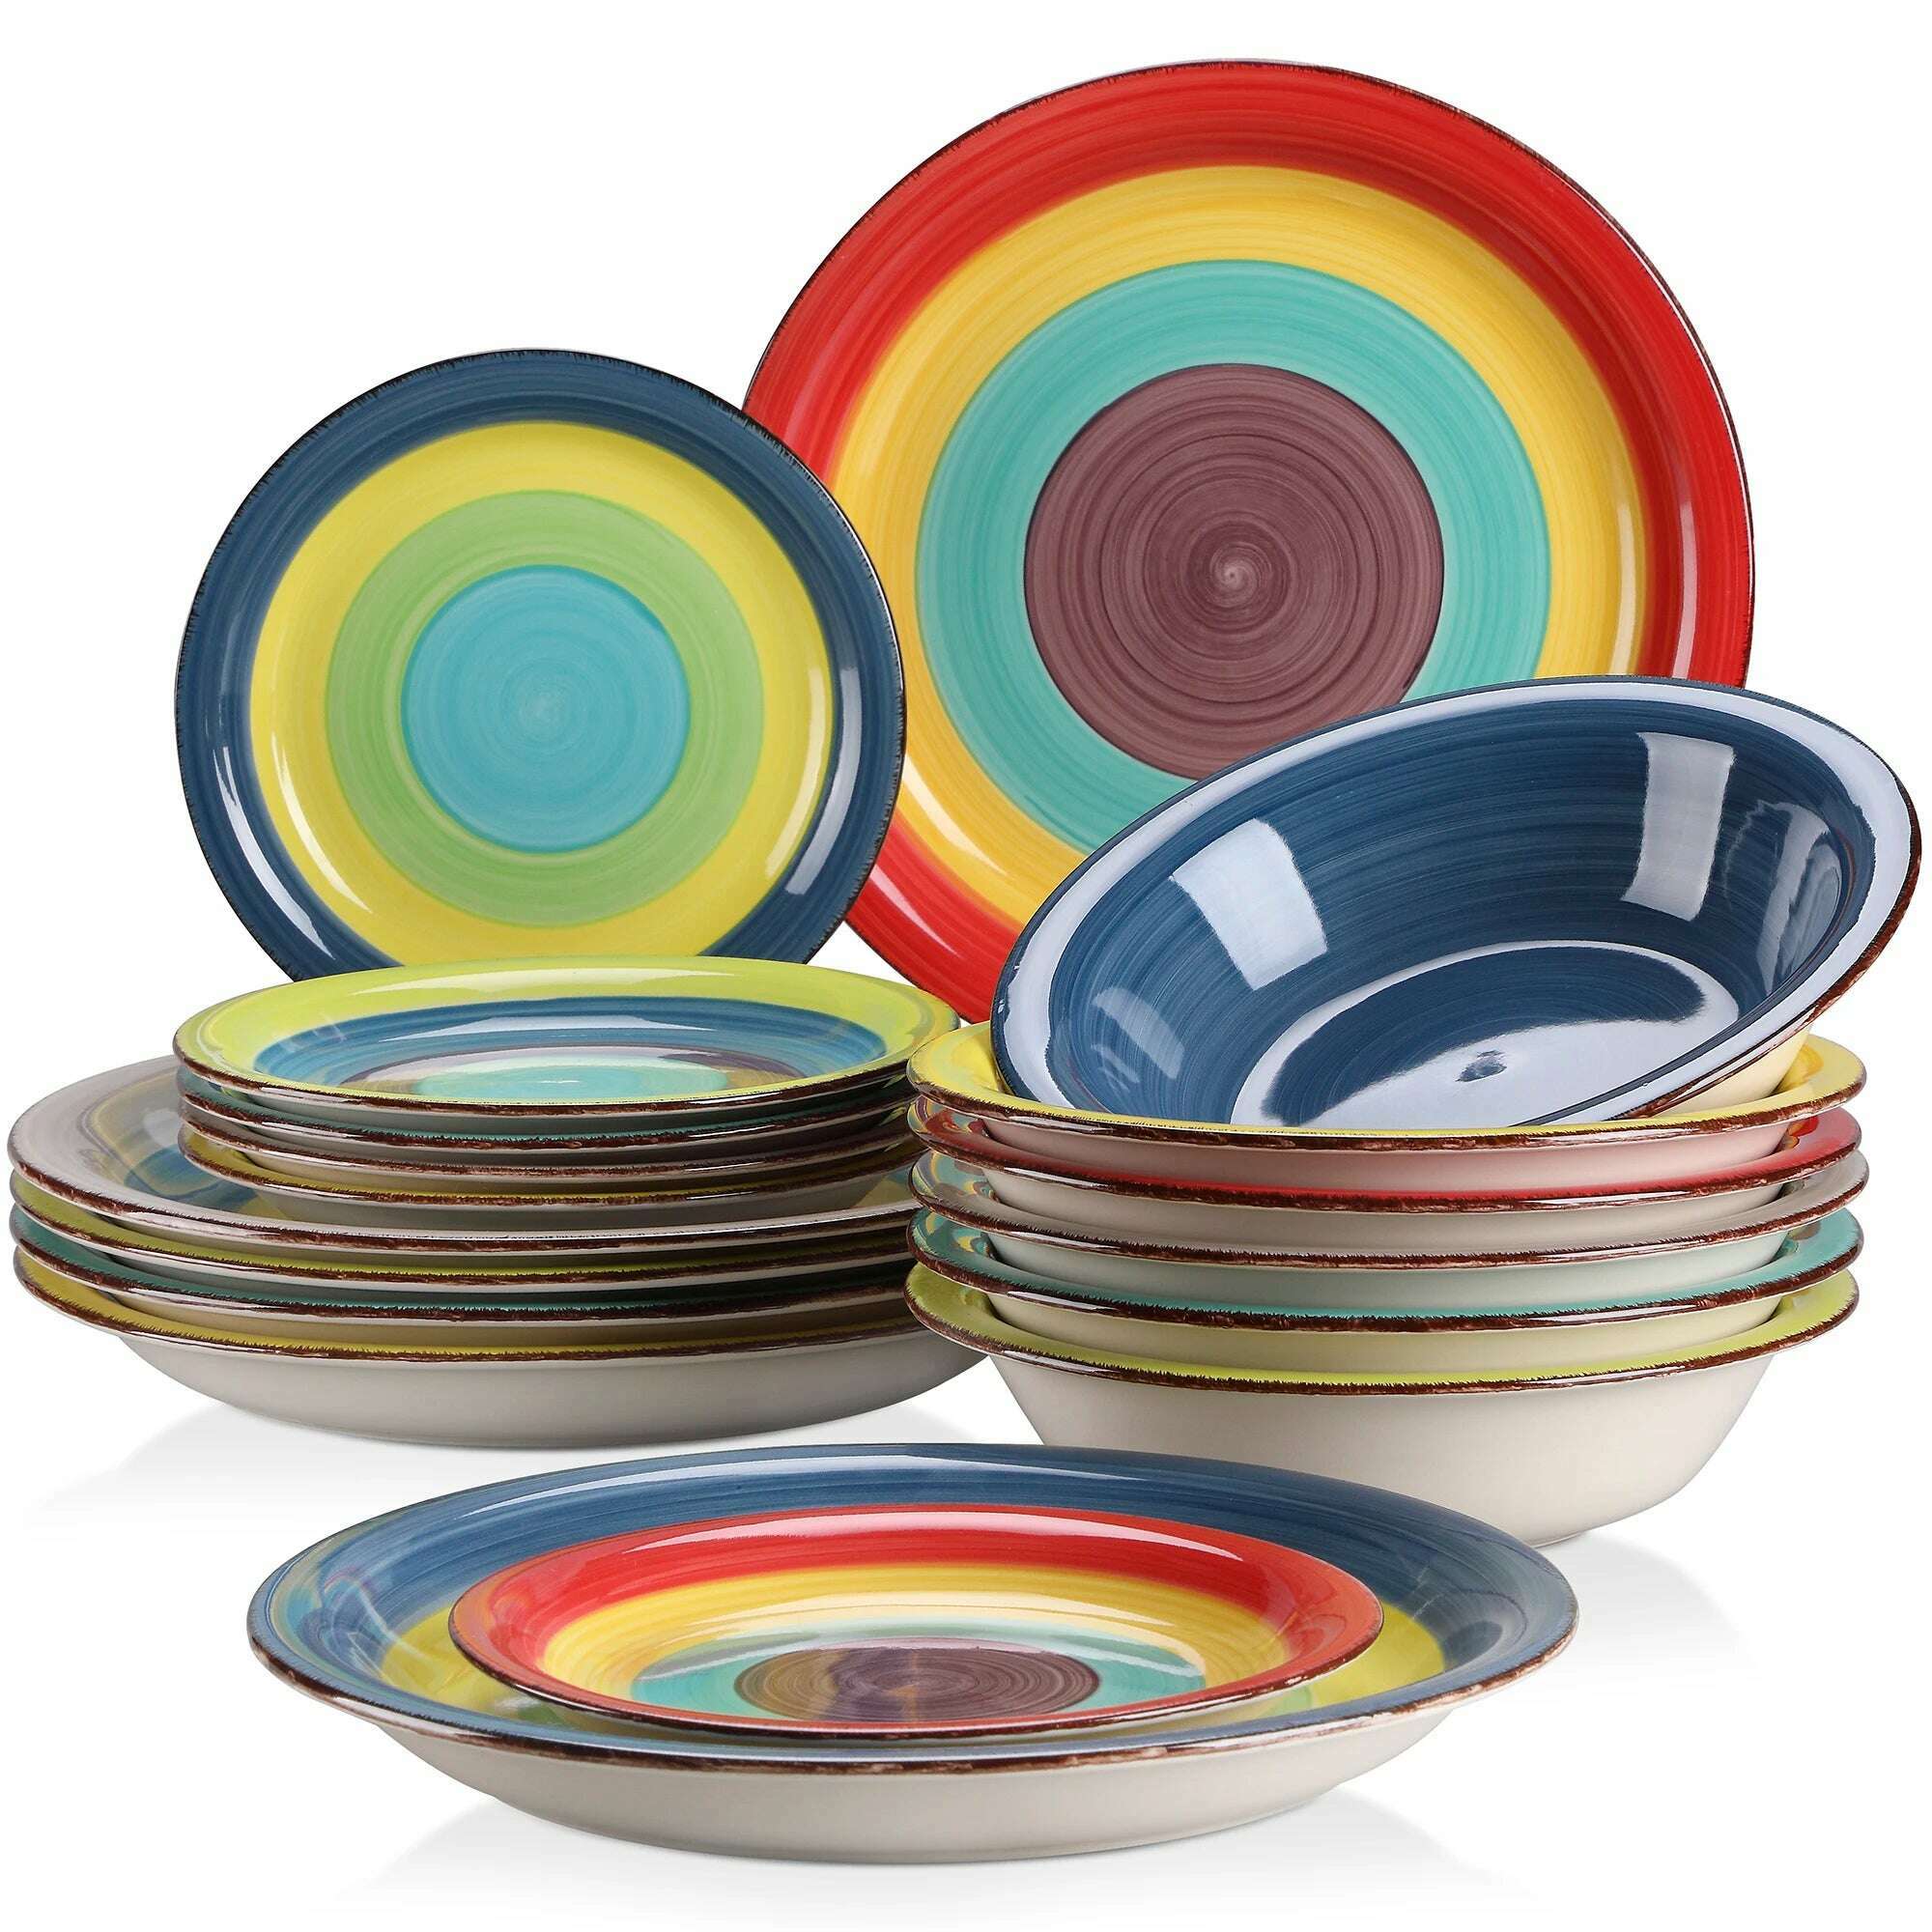 KIMLUD, New Vancasso Arco 18-Piece Ceramic Tableware Set Handpainted Spiral and Alternately Colourful Pattern Stoneware Dinner Set for 6, KIMLUD Womens Clothes